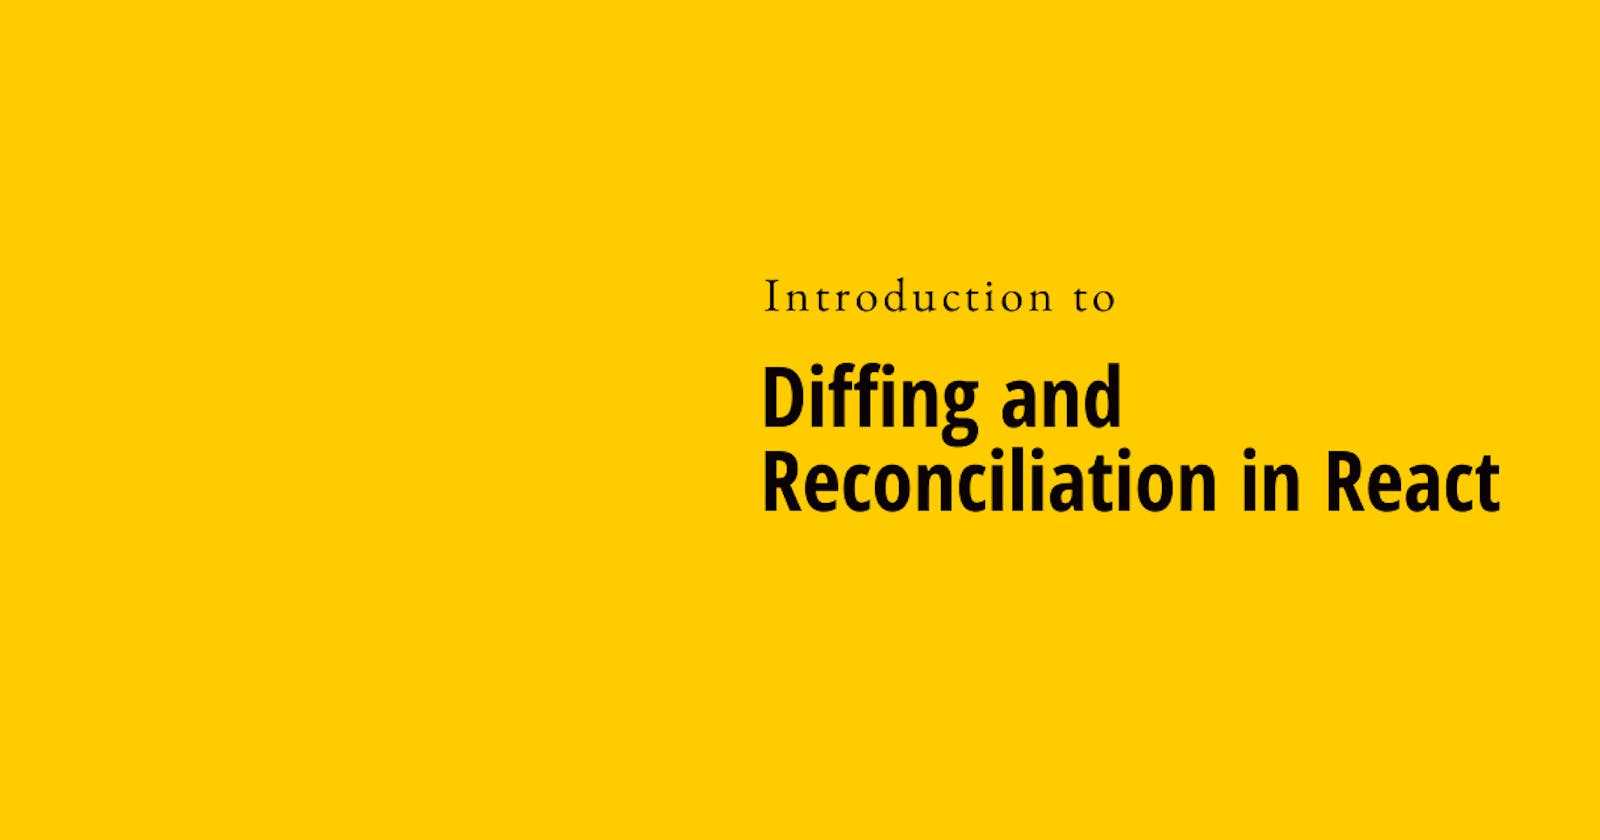 Introduction to Diffing and Reconciliation in React